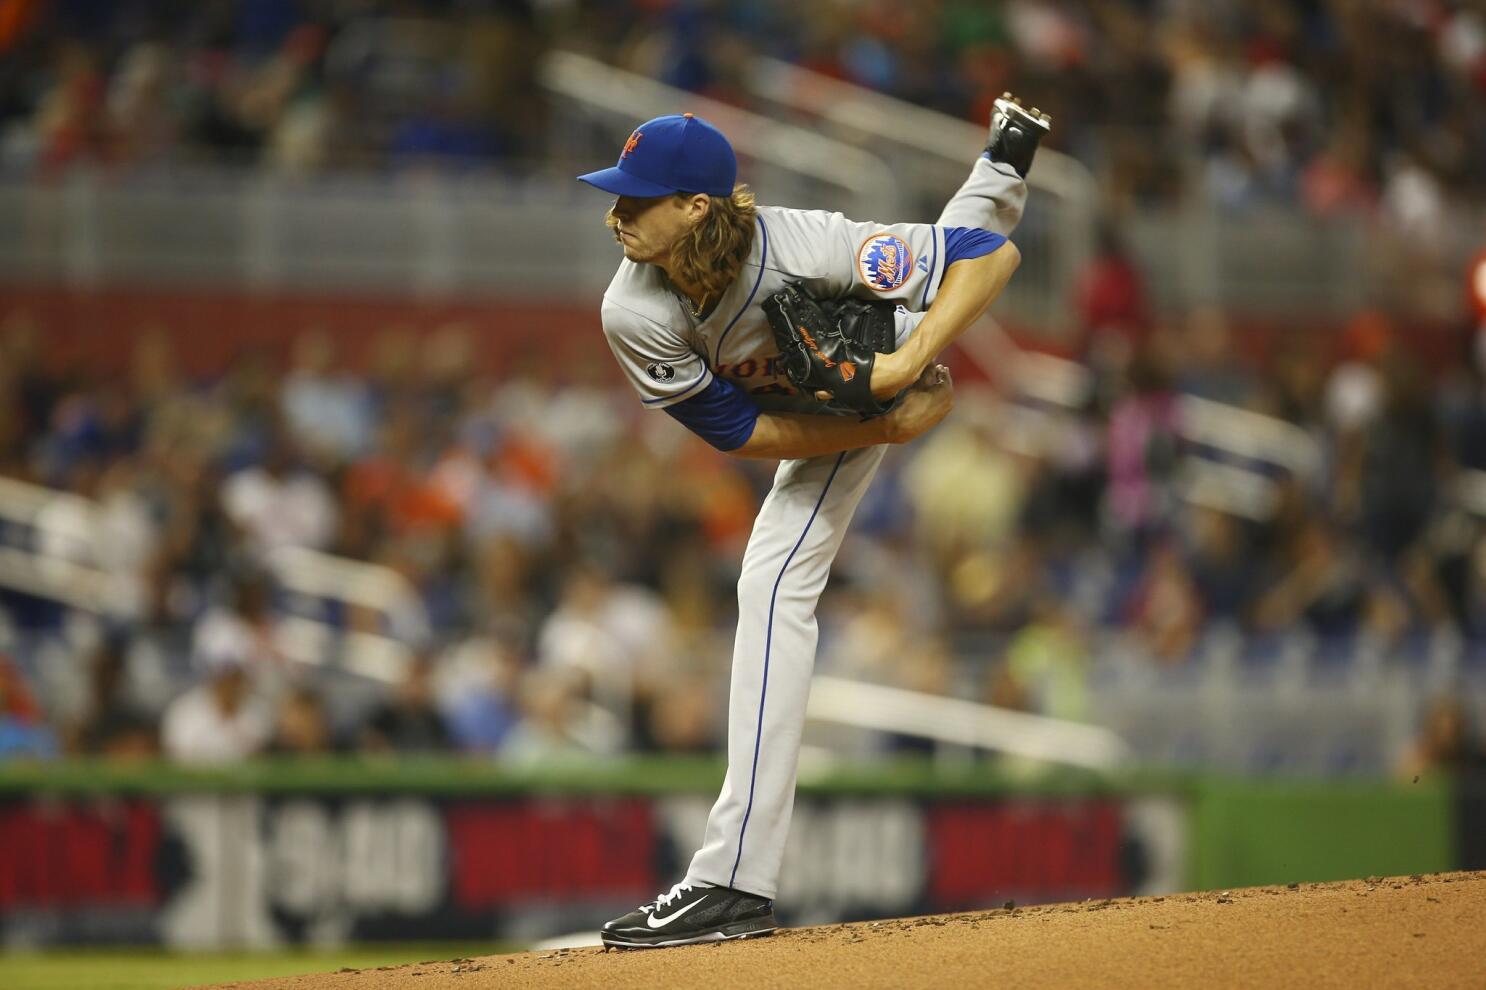 Mets injury update: Jenrry Mejia strikes out the side in first